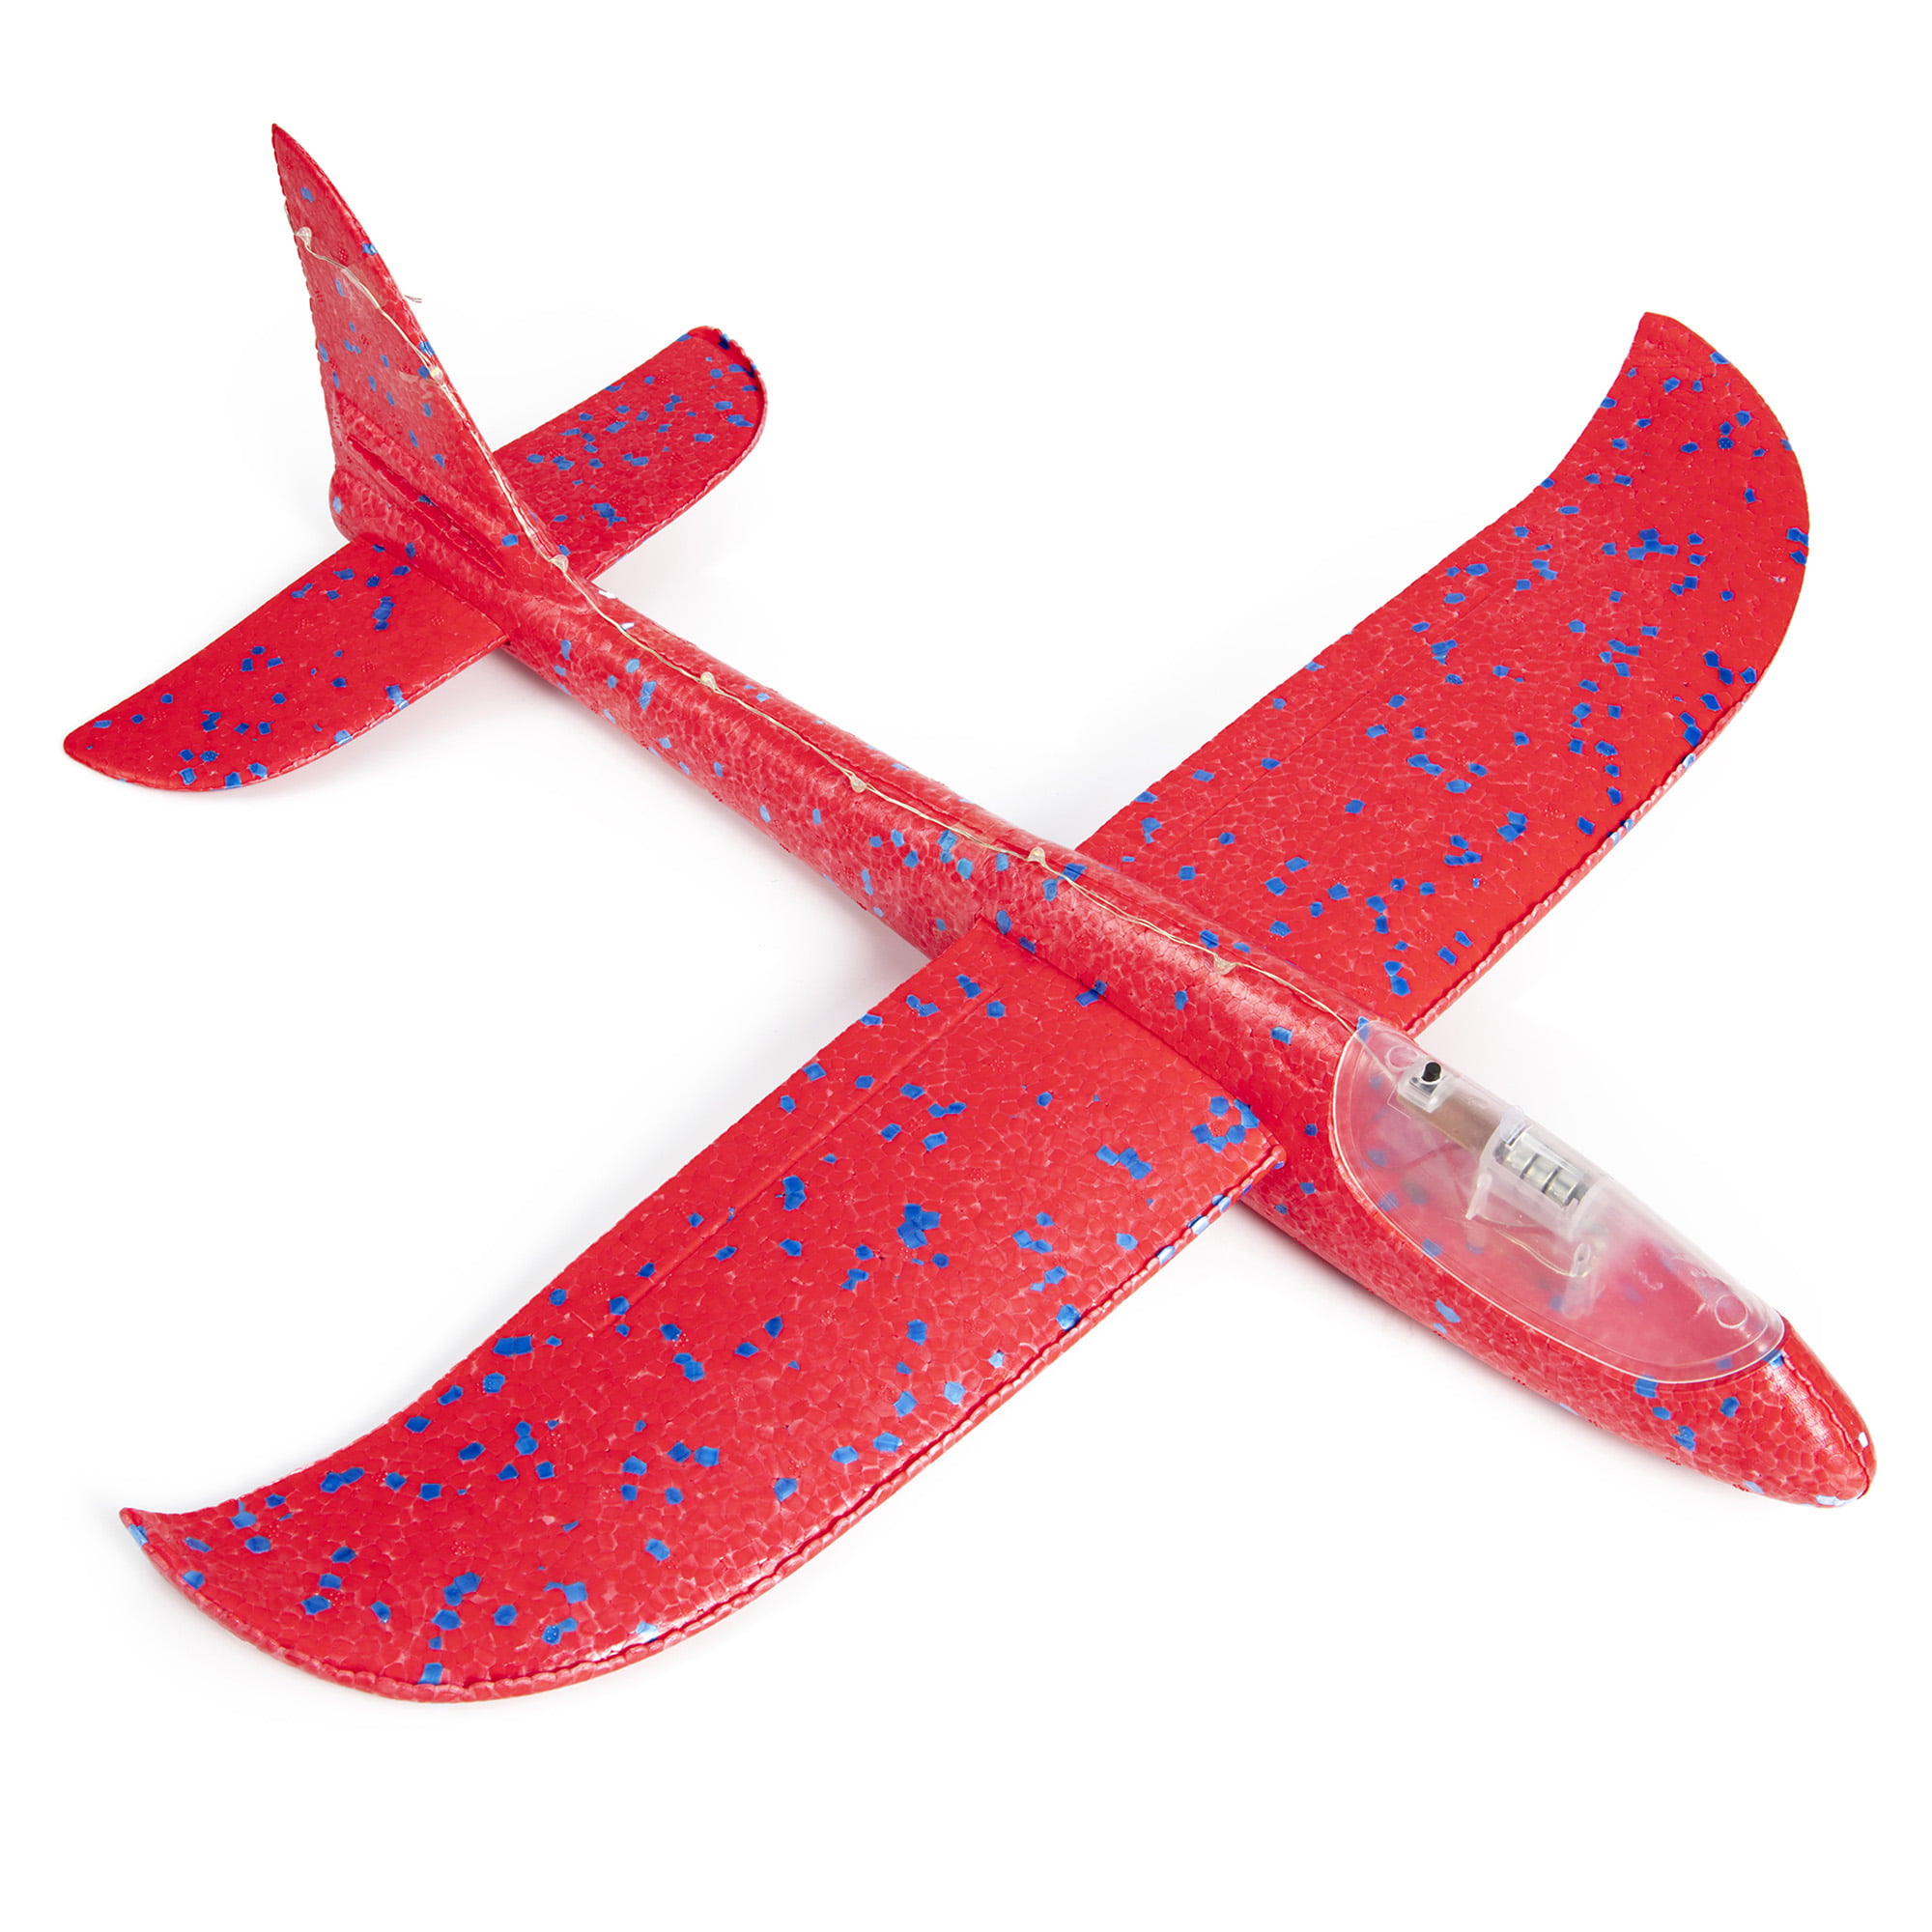 Hand Launch Throwing Glider Aircraft Foam Airplane Plane Model Outdoor Ped Toy 